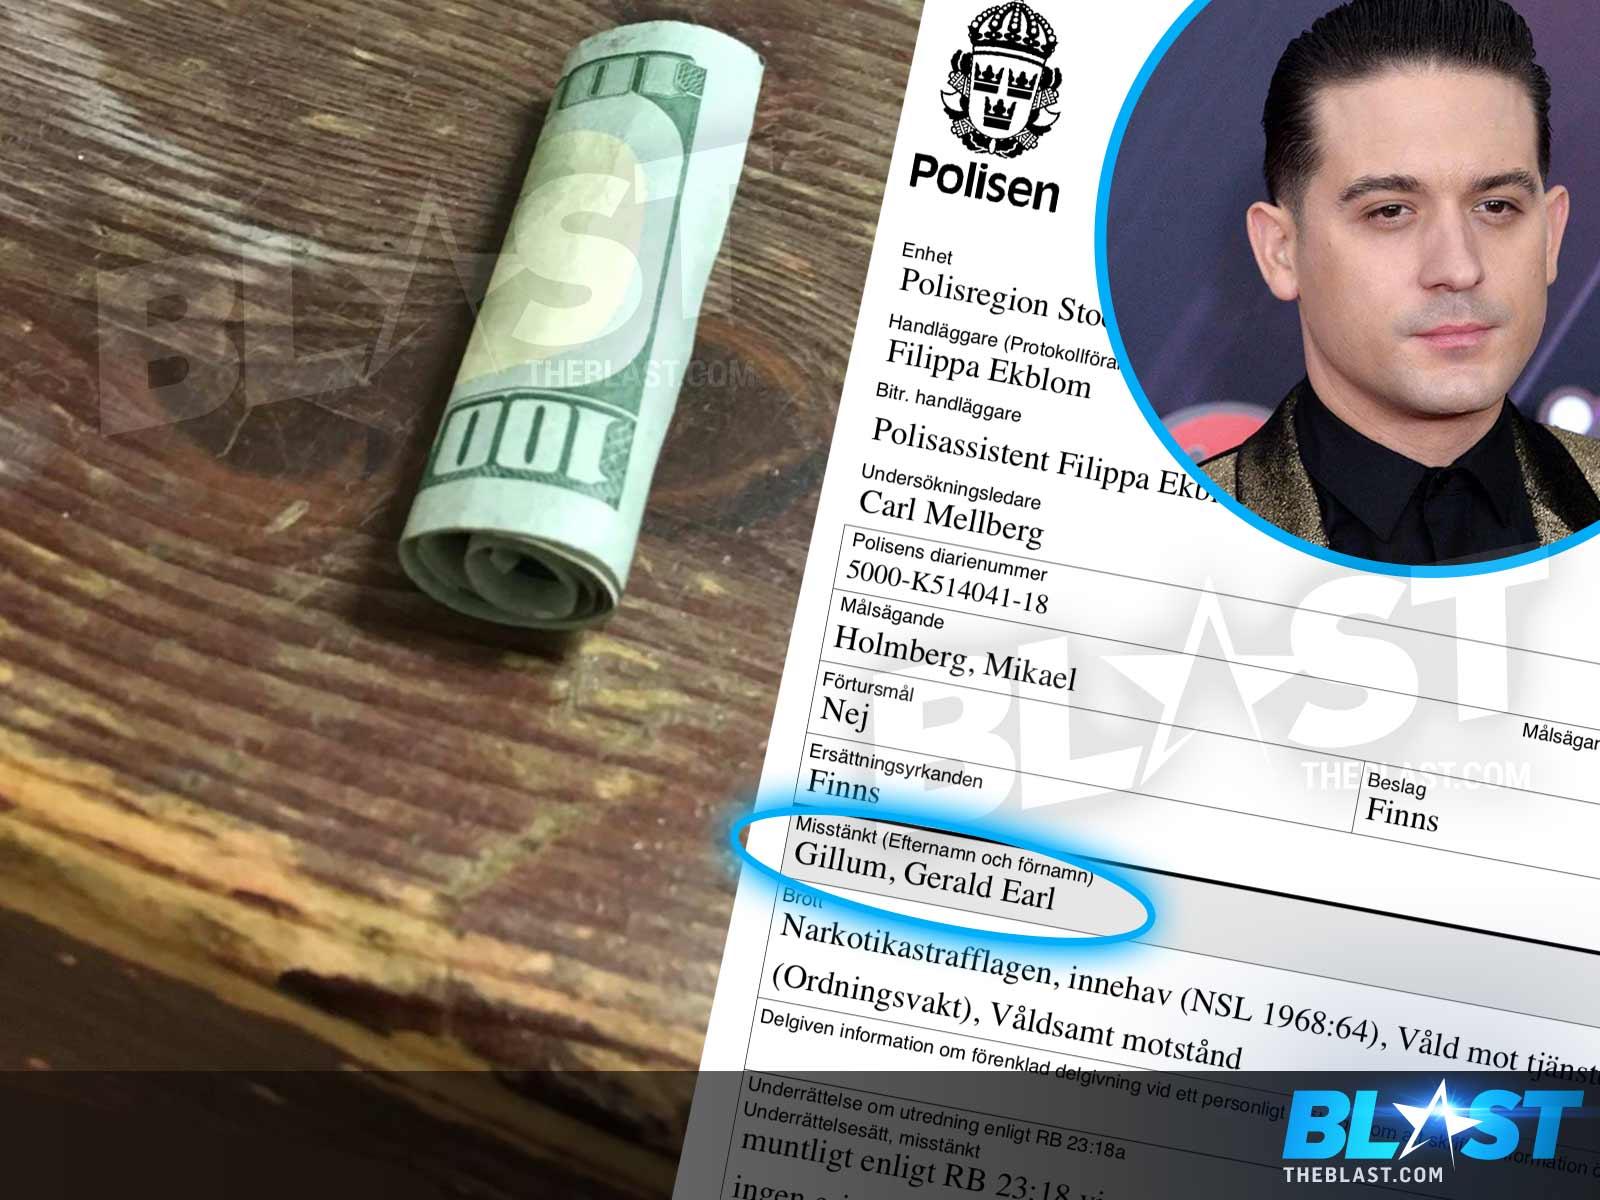 G-Eazy Had 1.5 Grams of Cocaine, Rolled Up $100 in Pocket at Time of Arrest